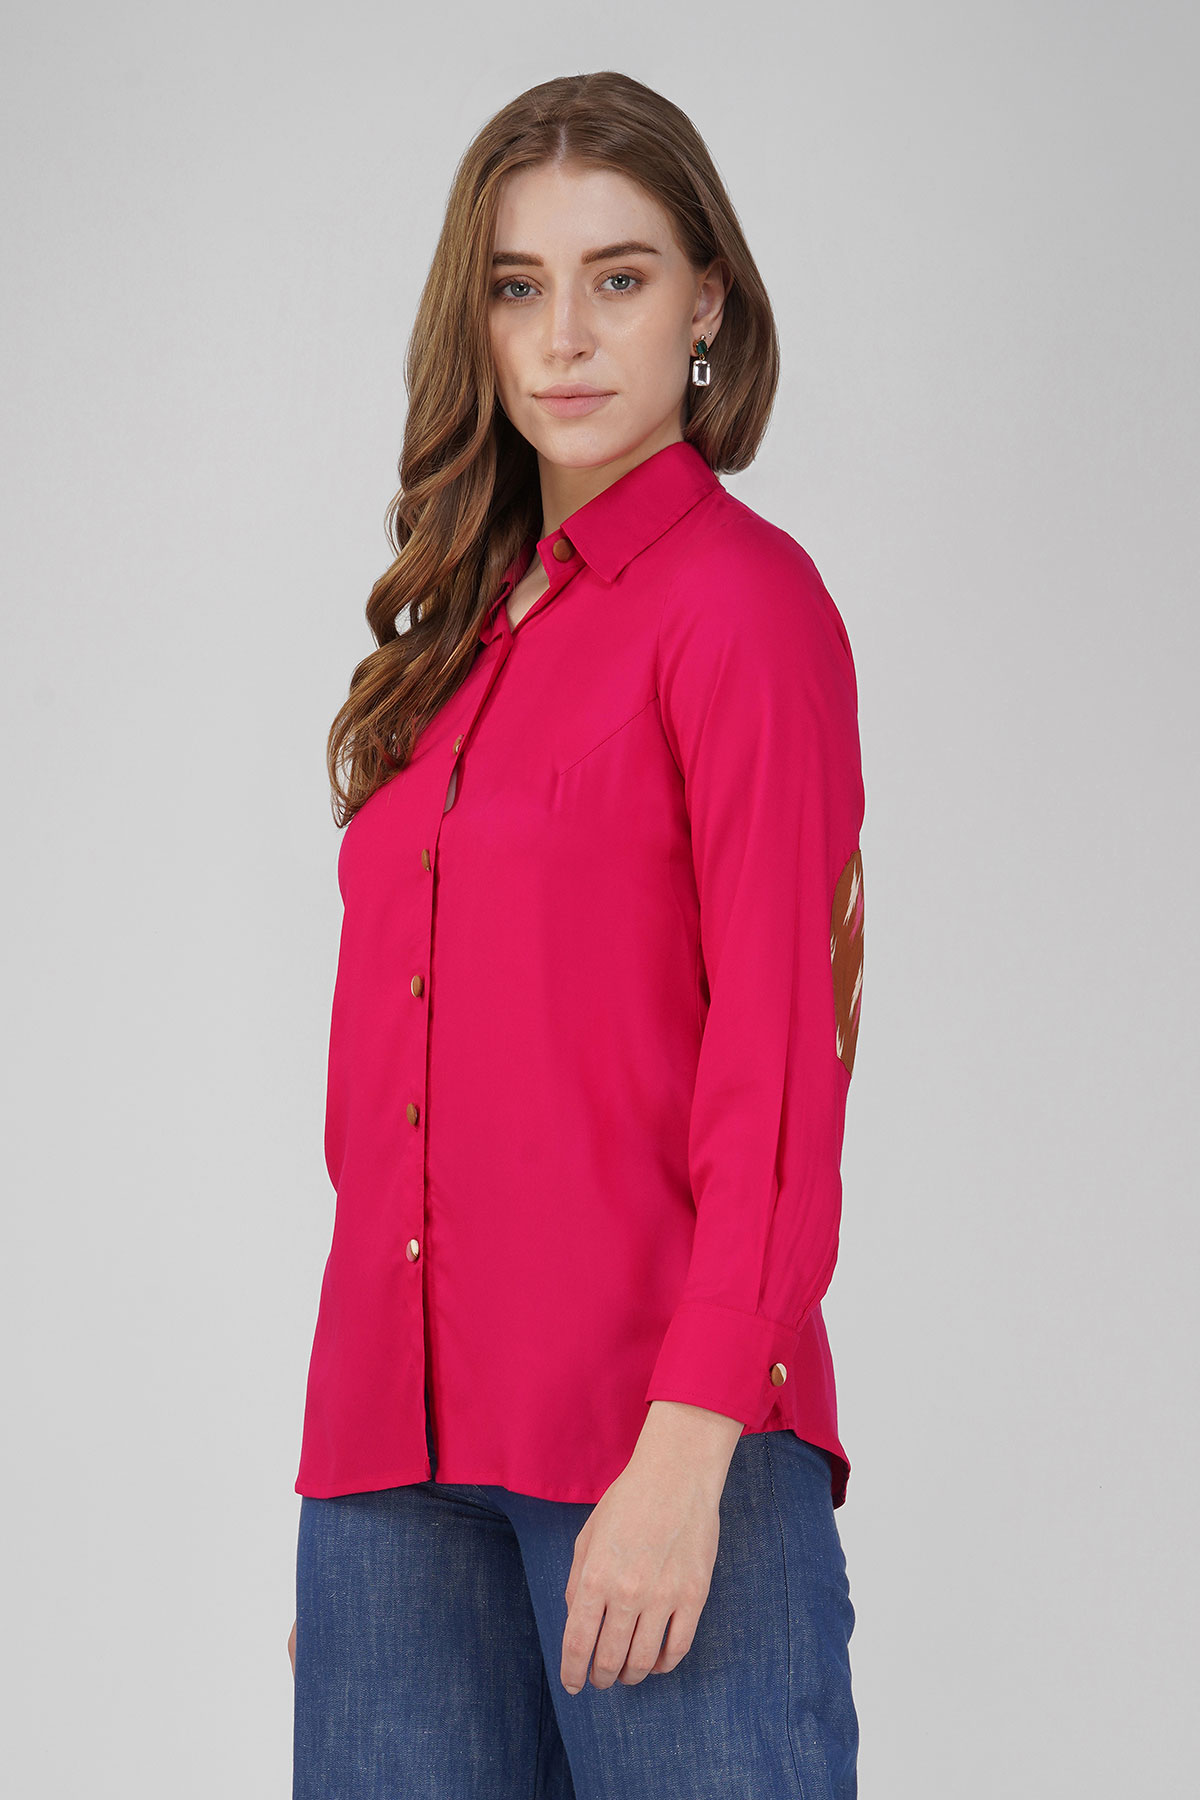 Hot Pink Elbow Patch Shirt